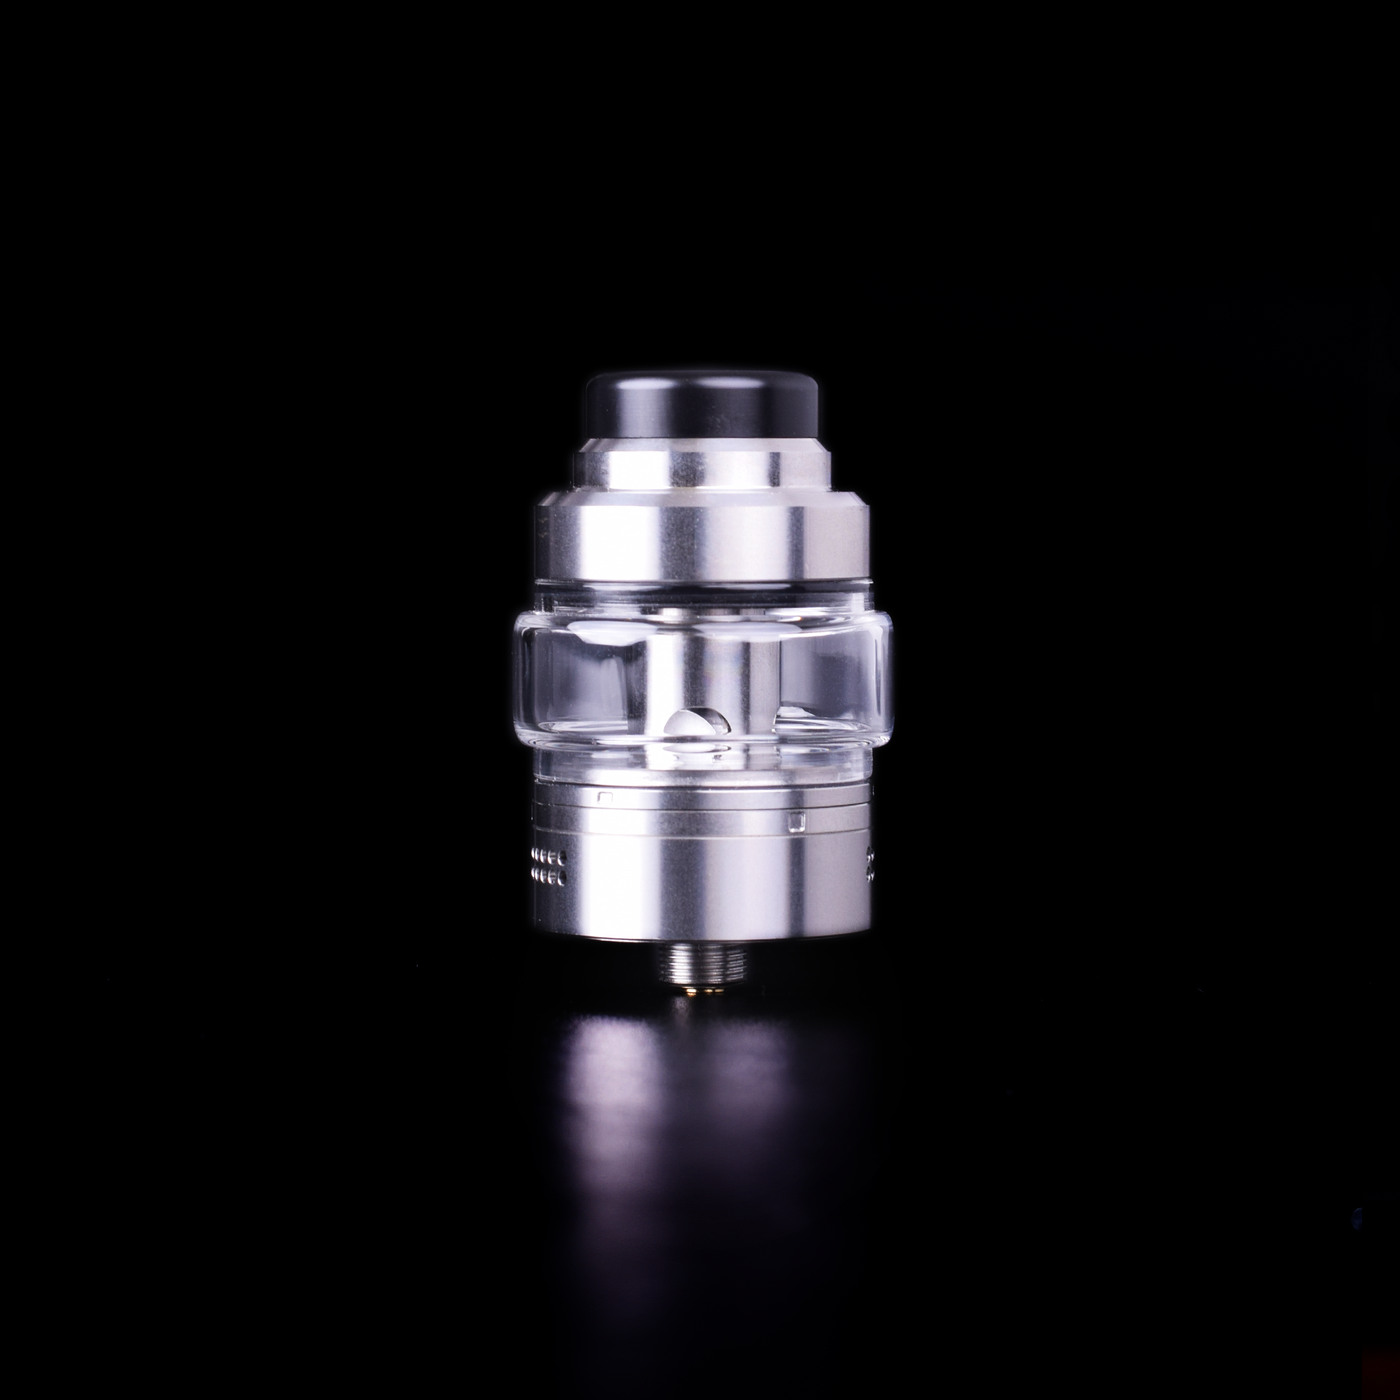 Shift Sub-Tank (Stainless Steel)